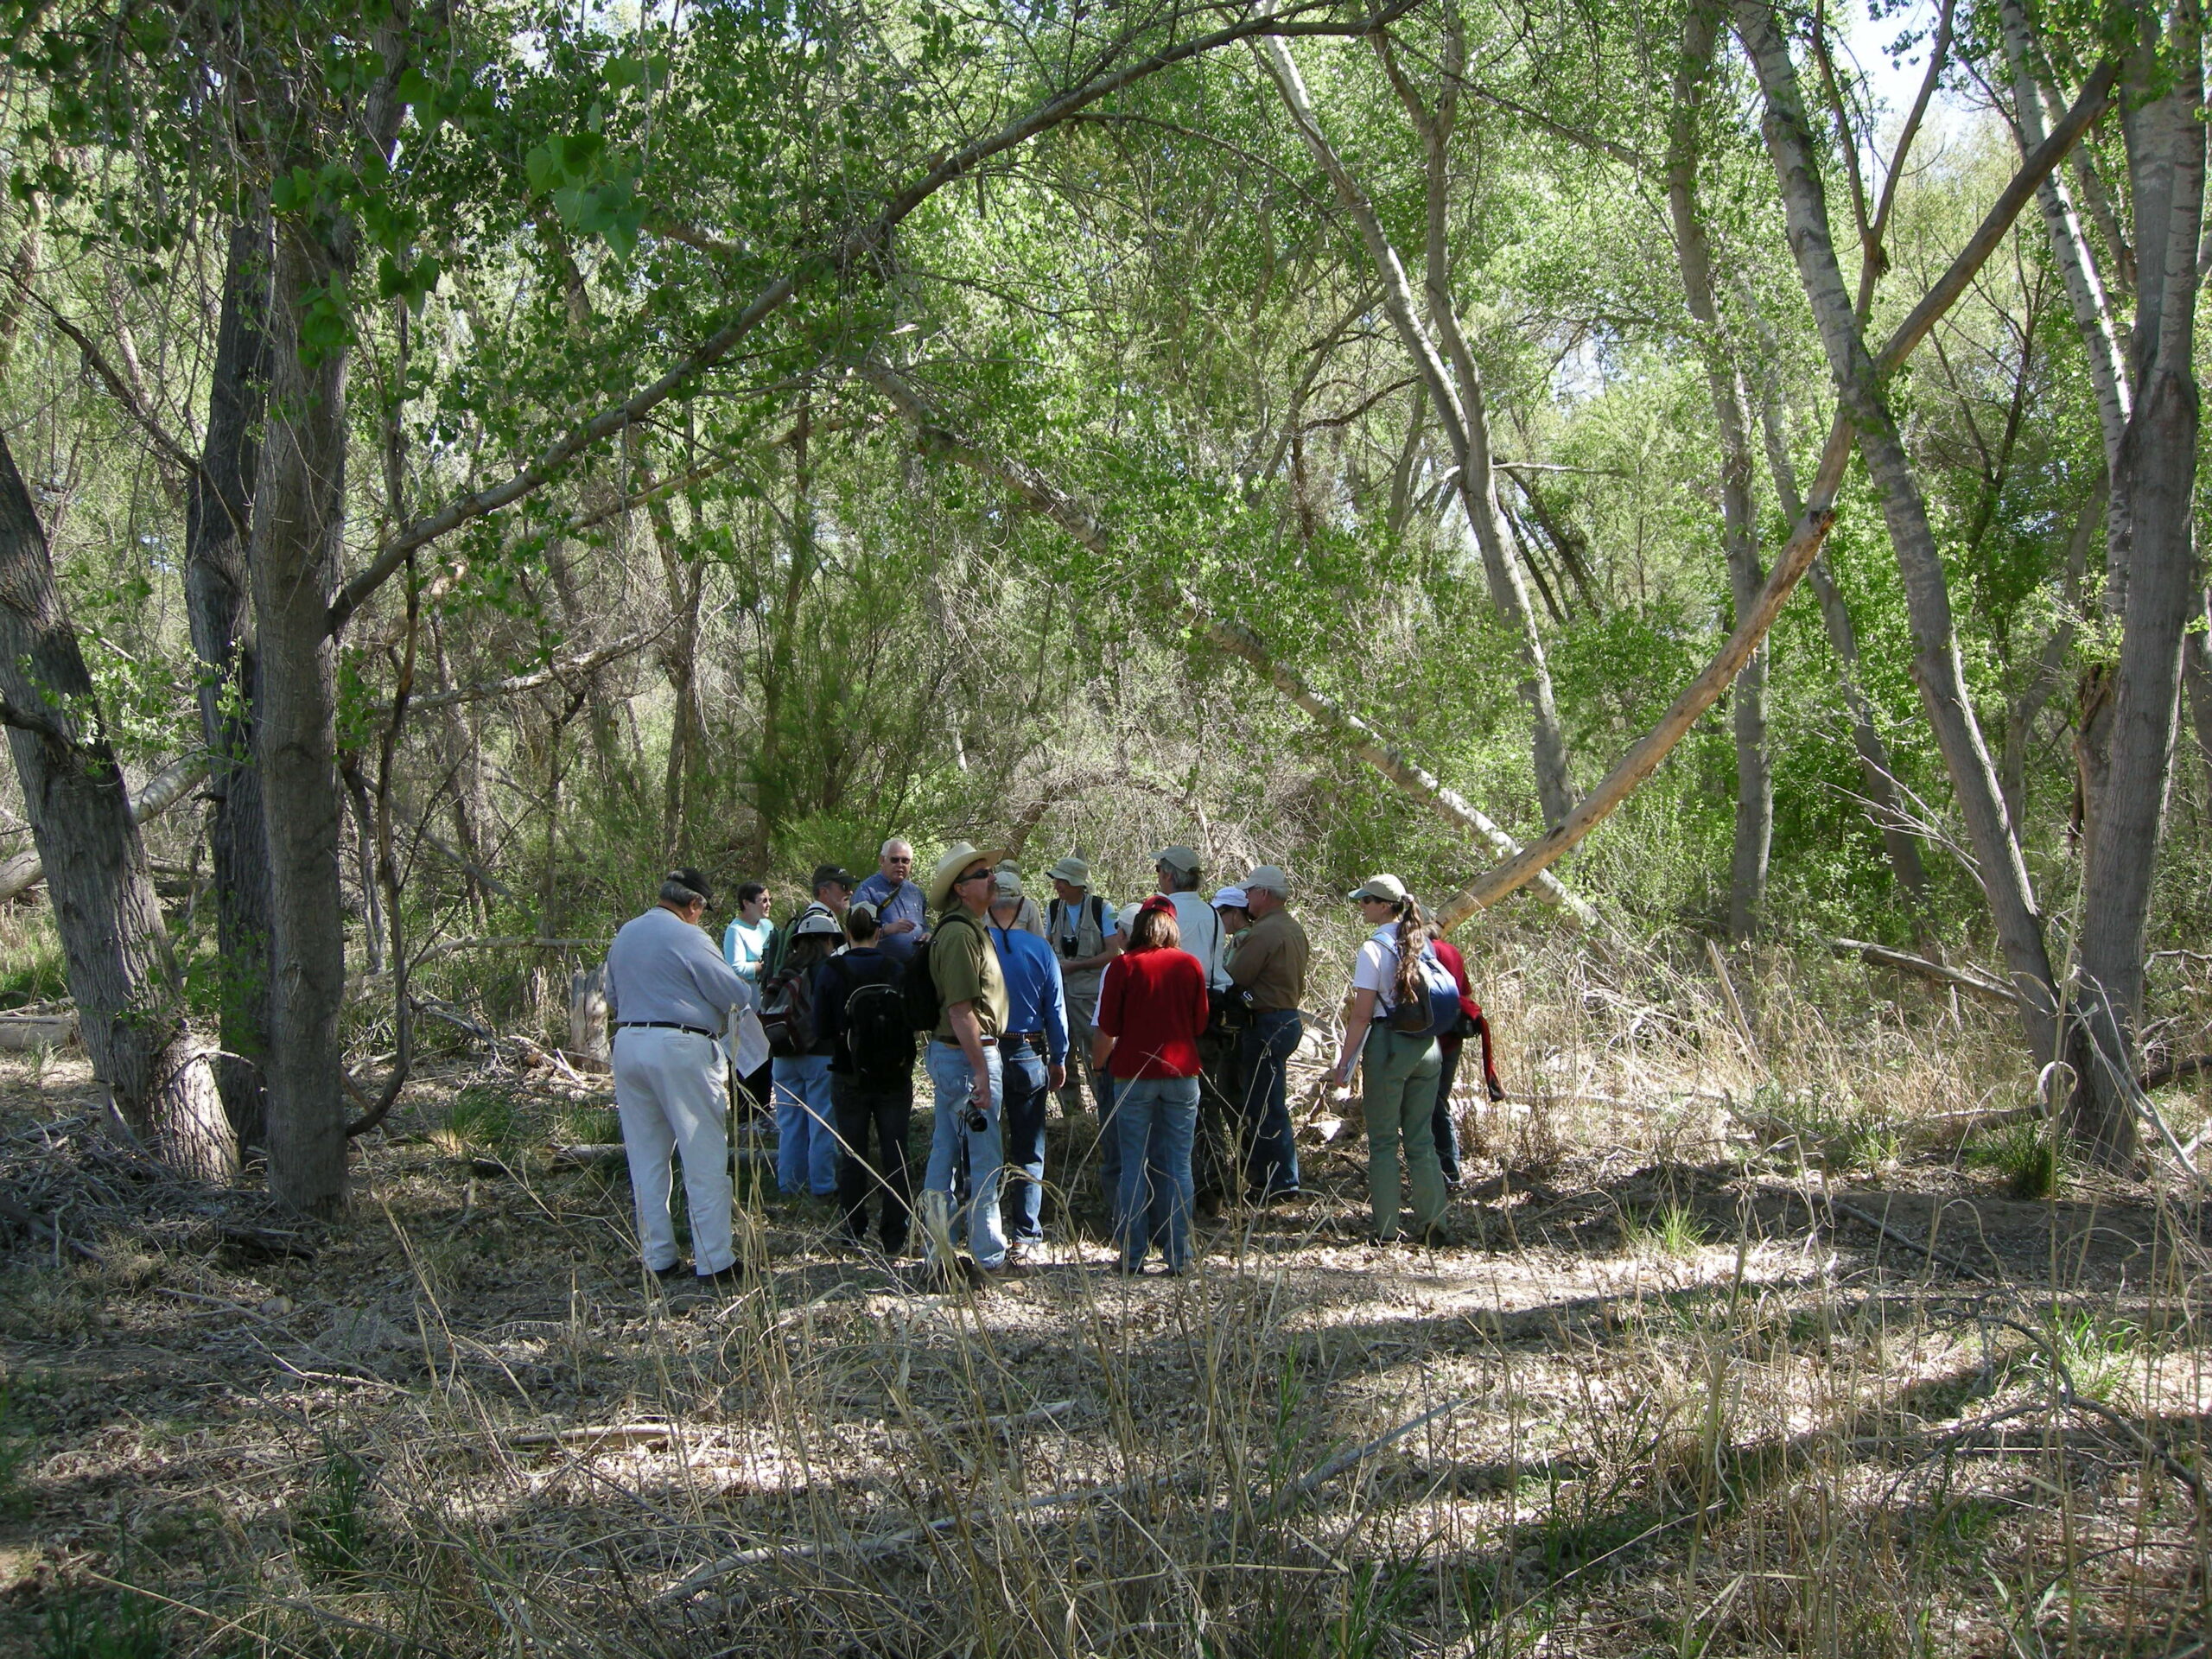 People on a field trip along the Verde River